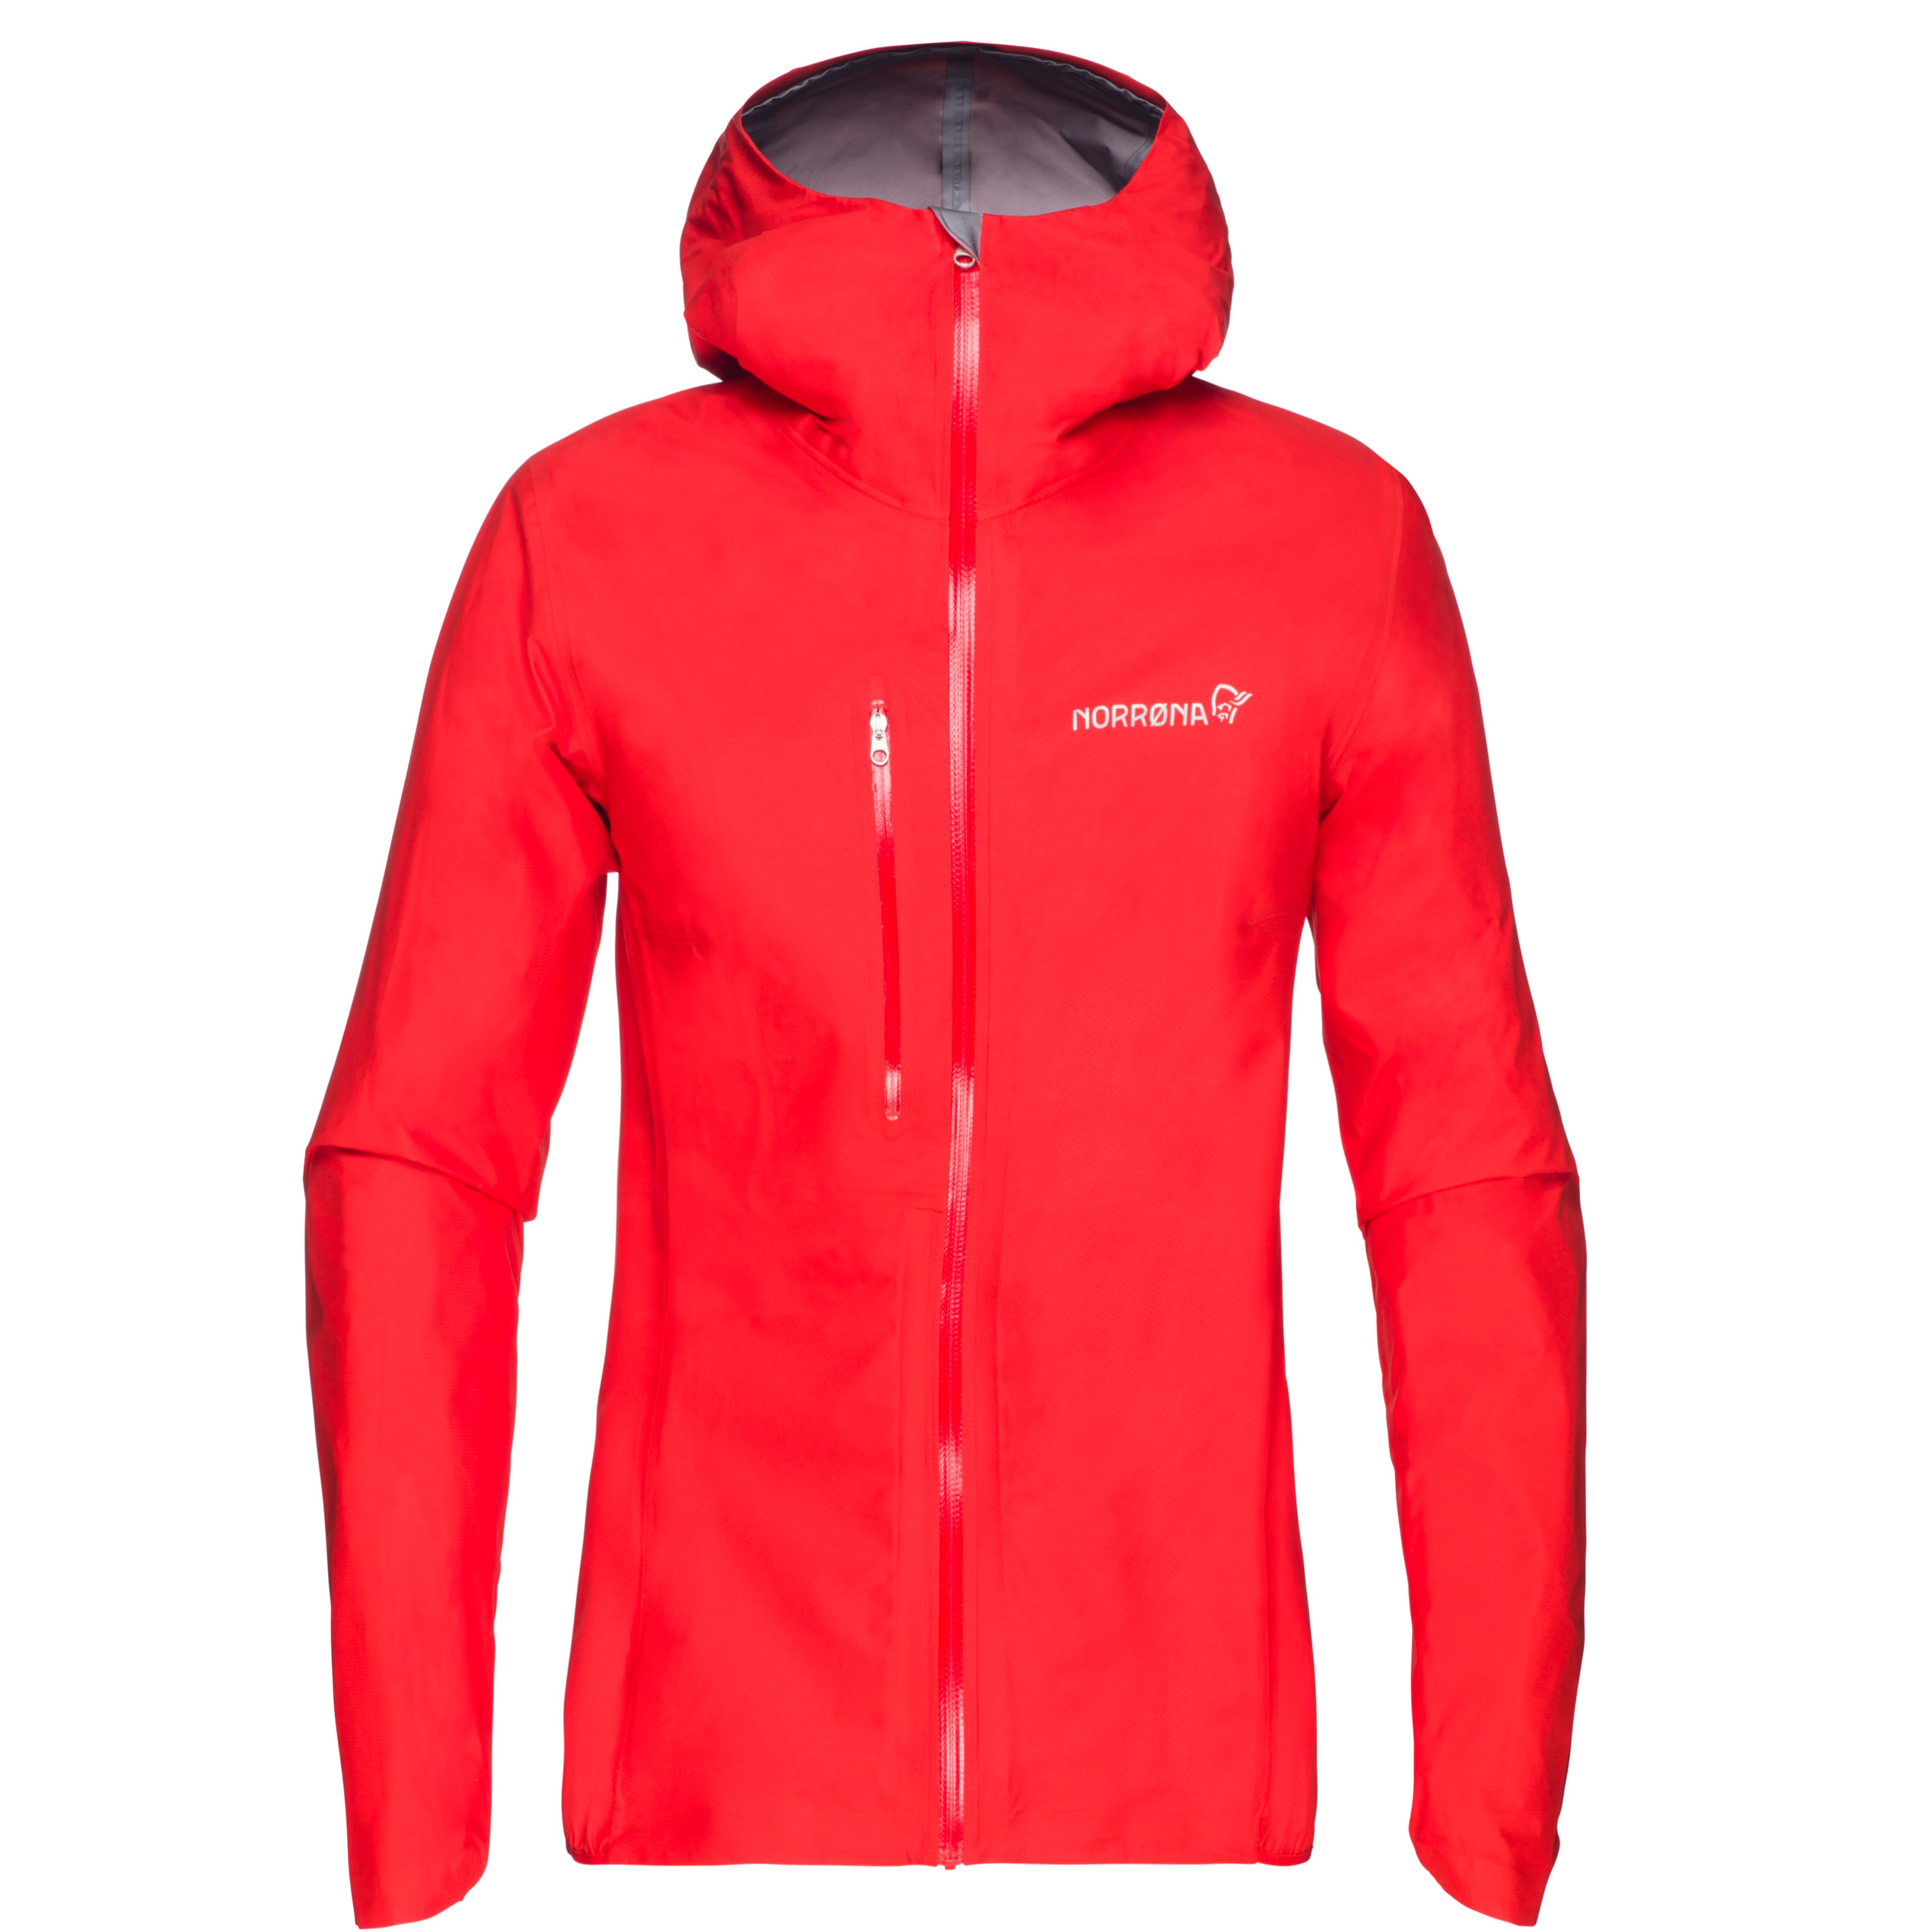 Buy Norrøna Women's Bitihorn Gore-Tex Active 2.0 Jacket from Outnorth